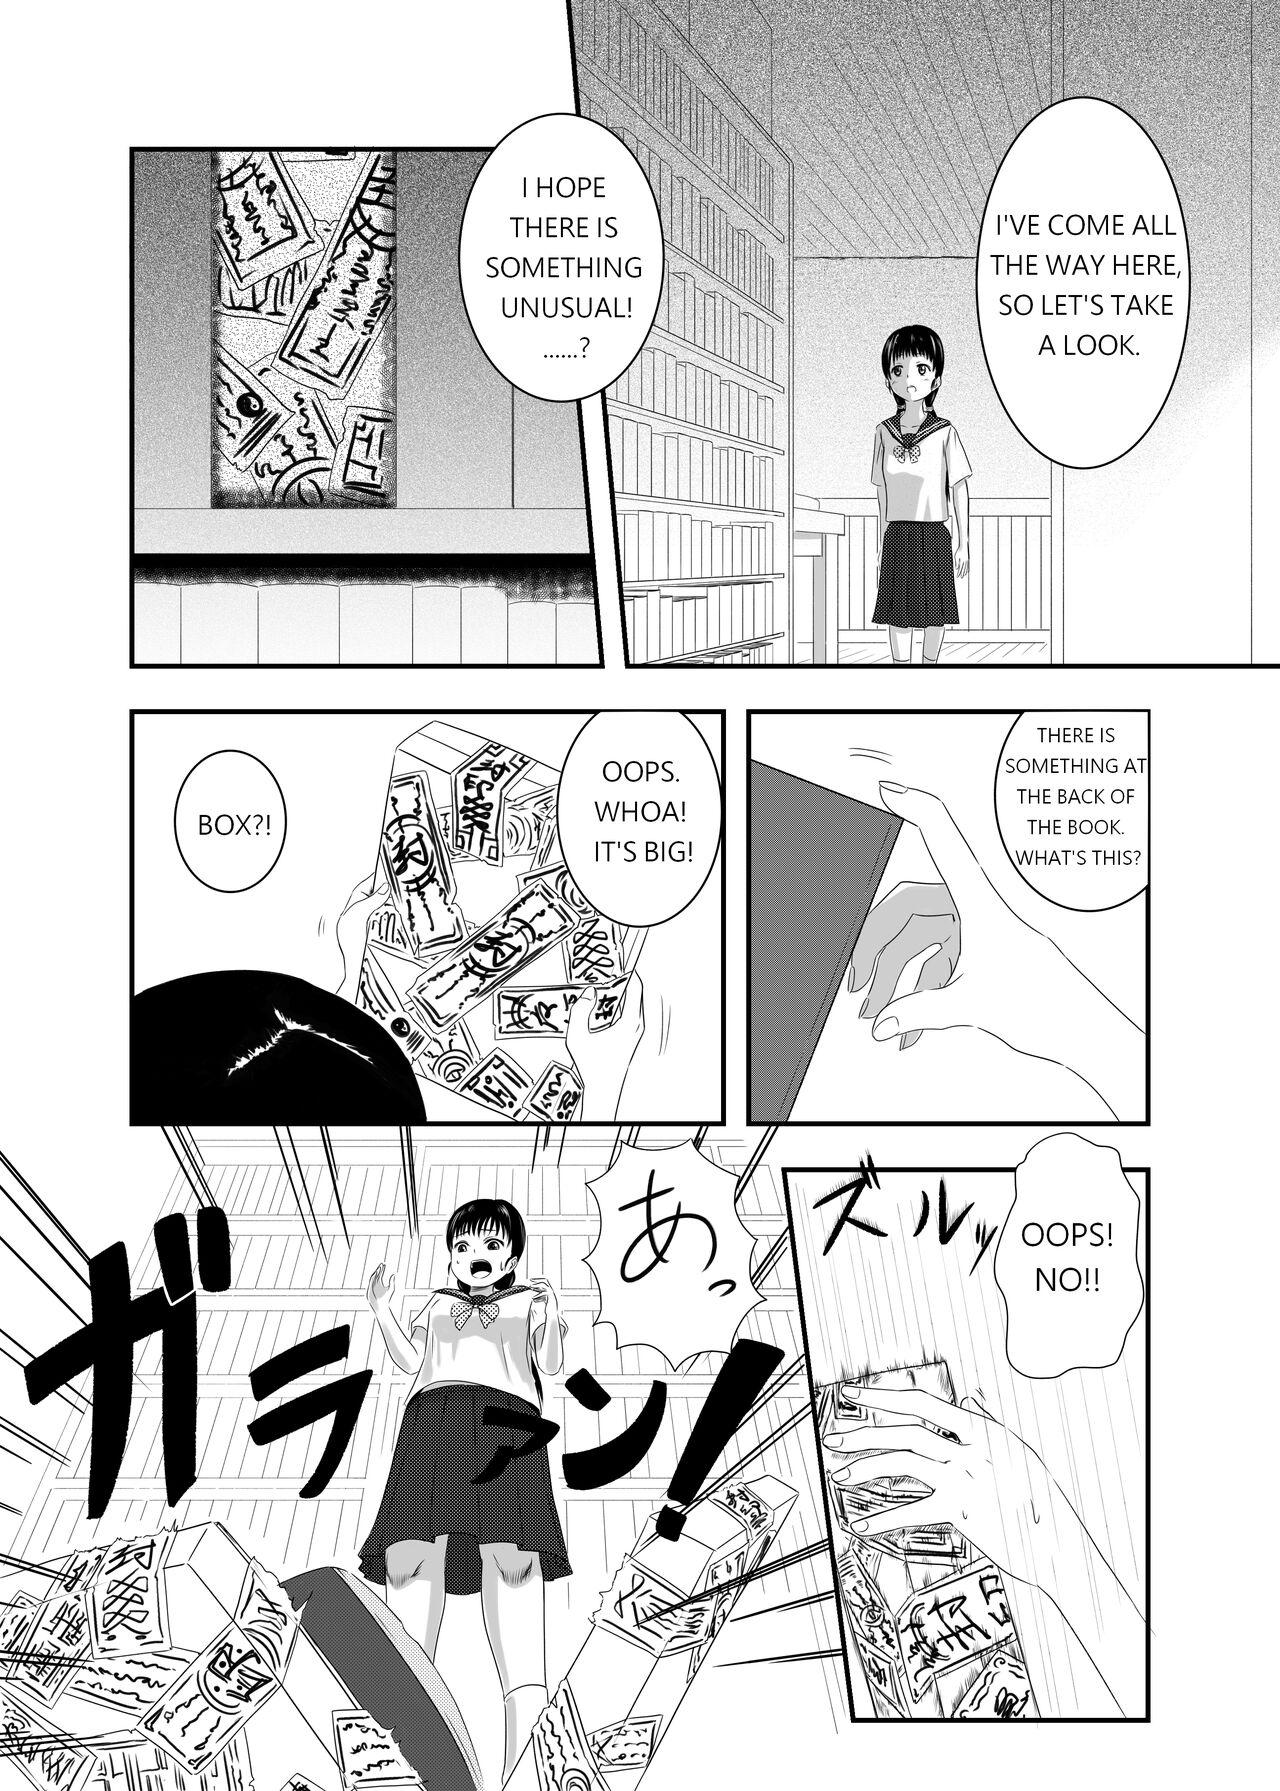 1080p The Evil Mask 1 - The mask 4some - Page 6